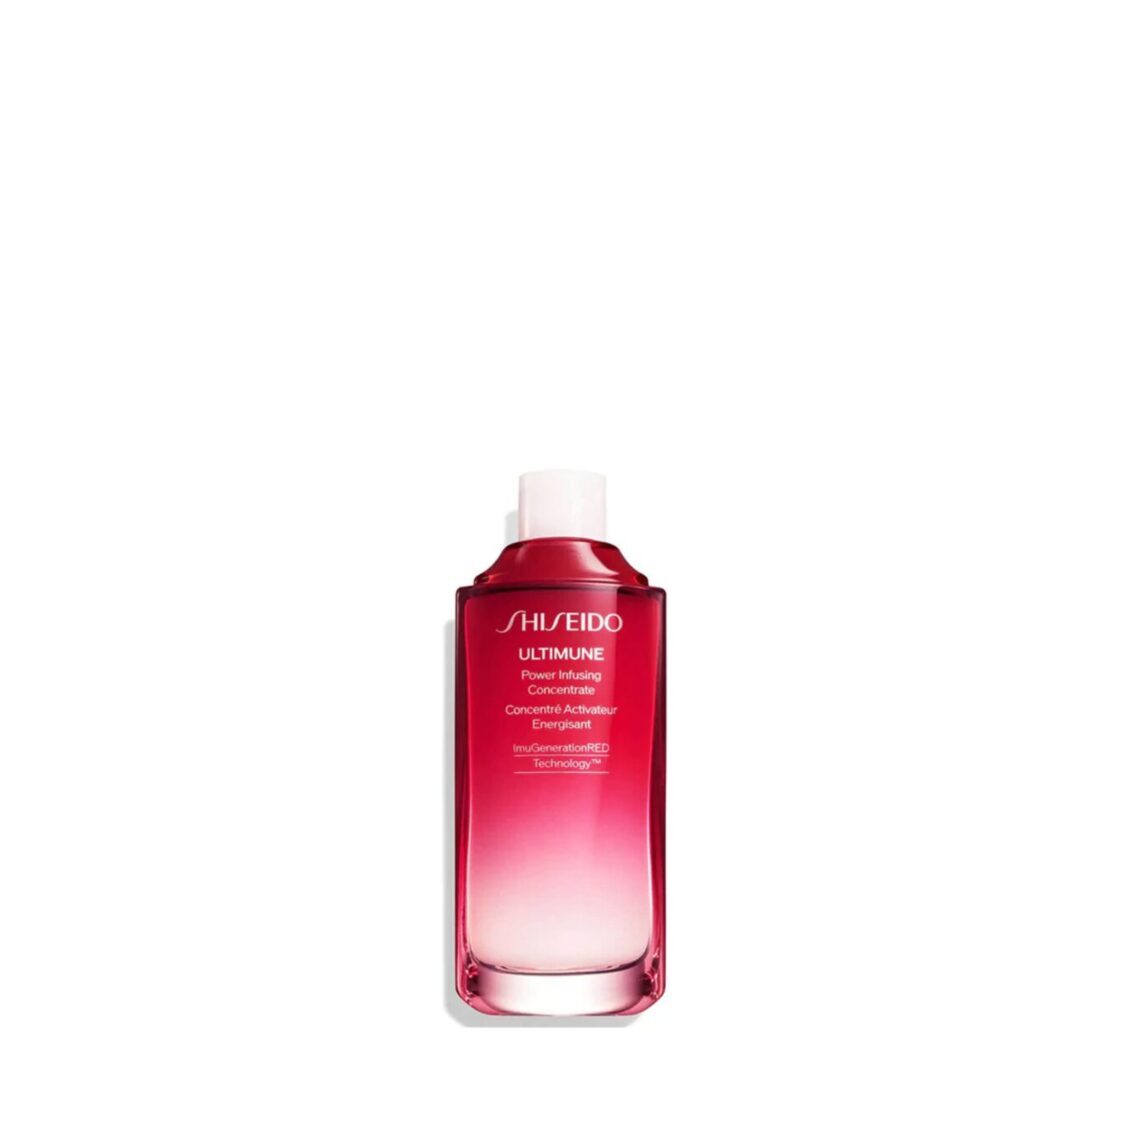 Shiseido Ultimune Power Infusing Concentrate 75ml Refill